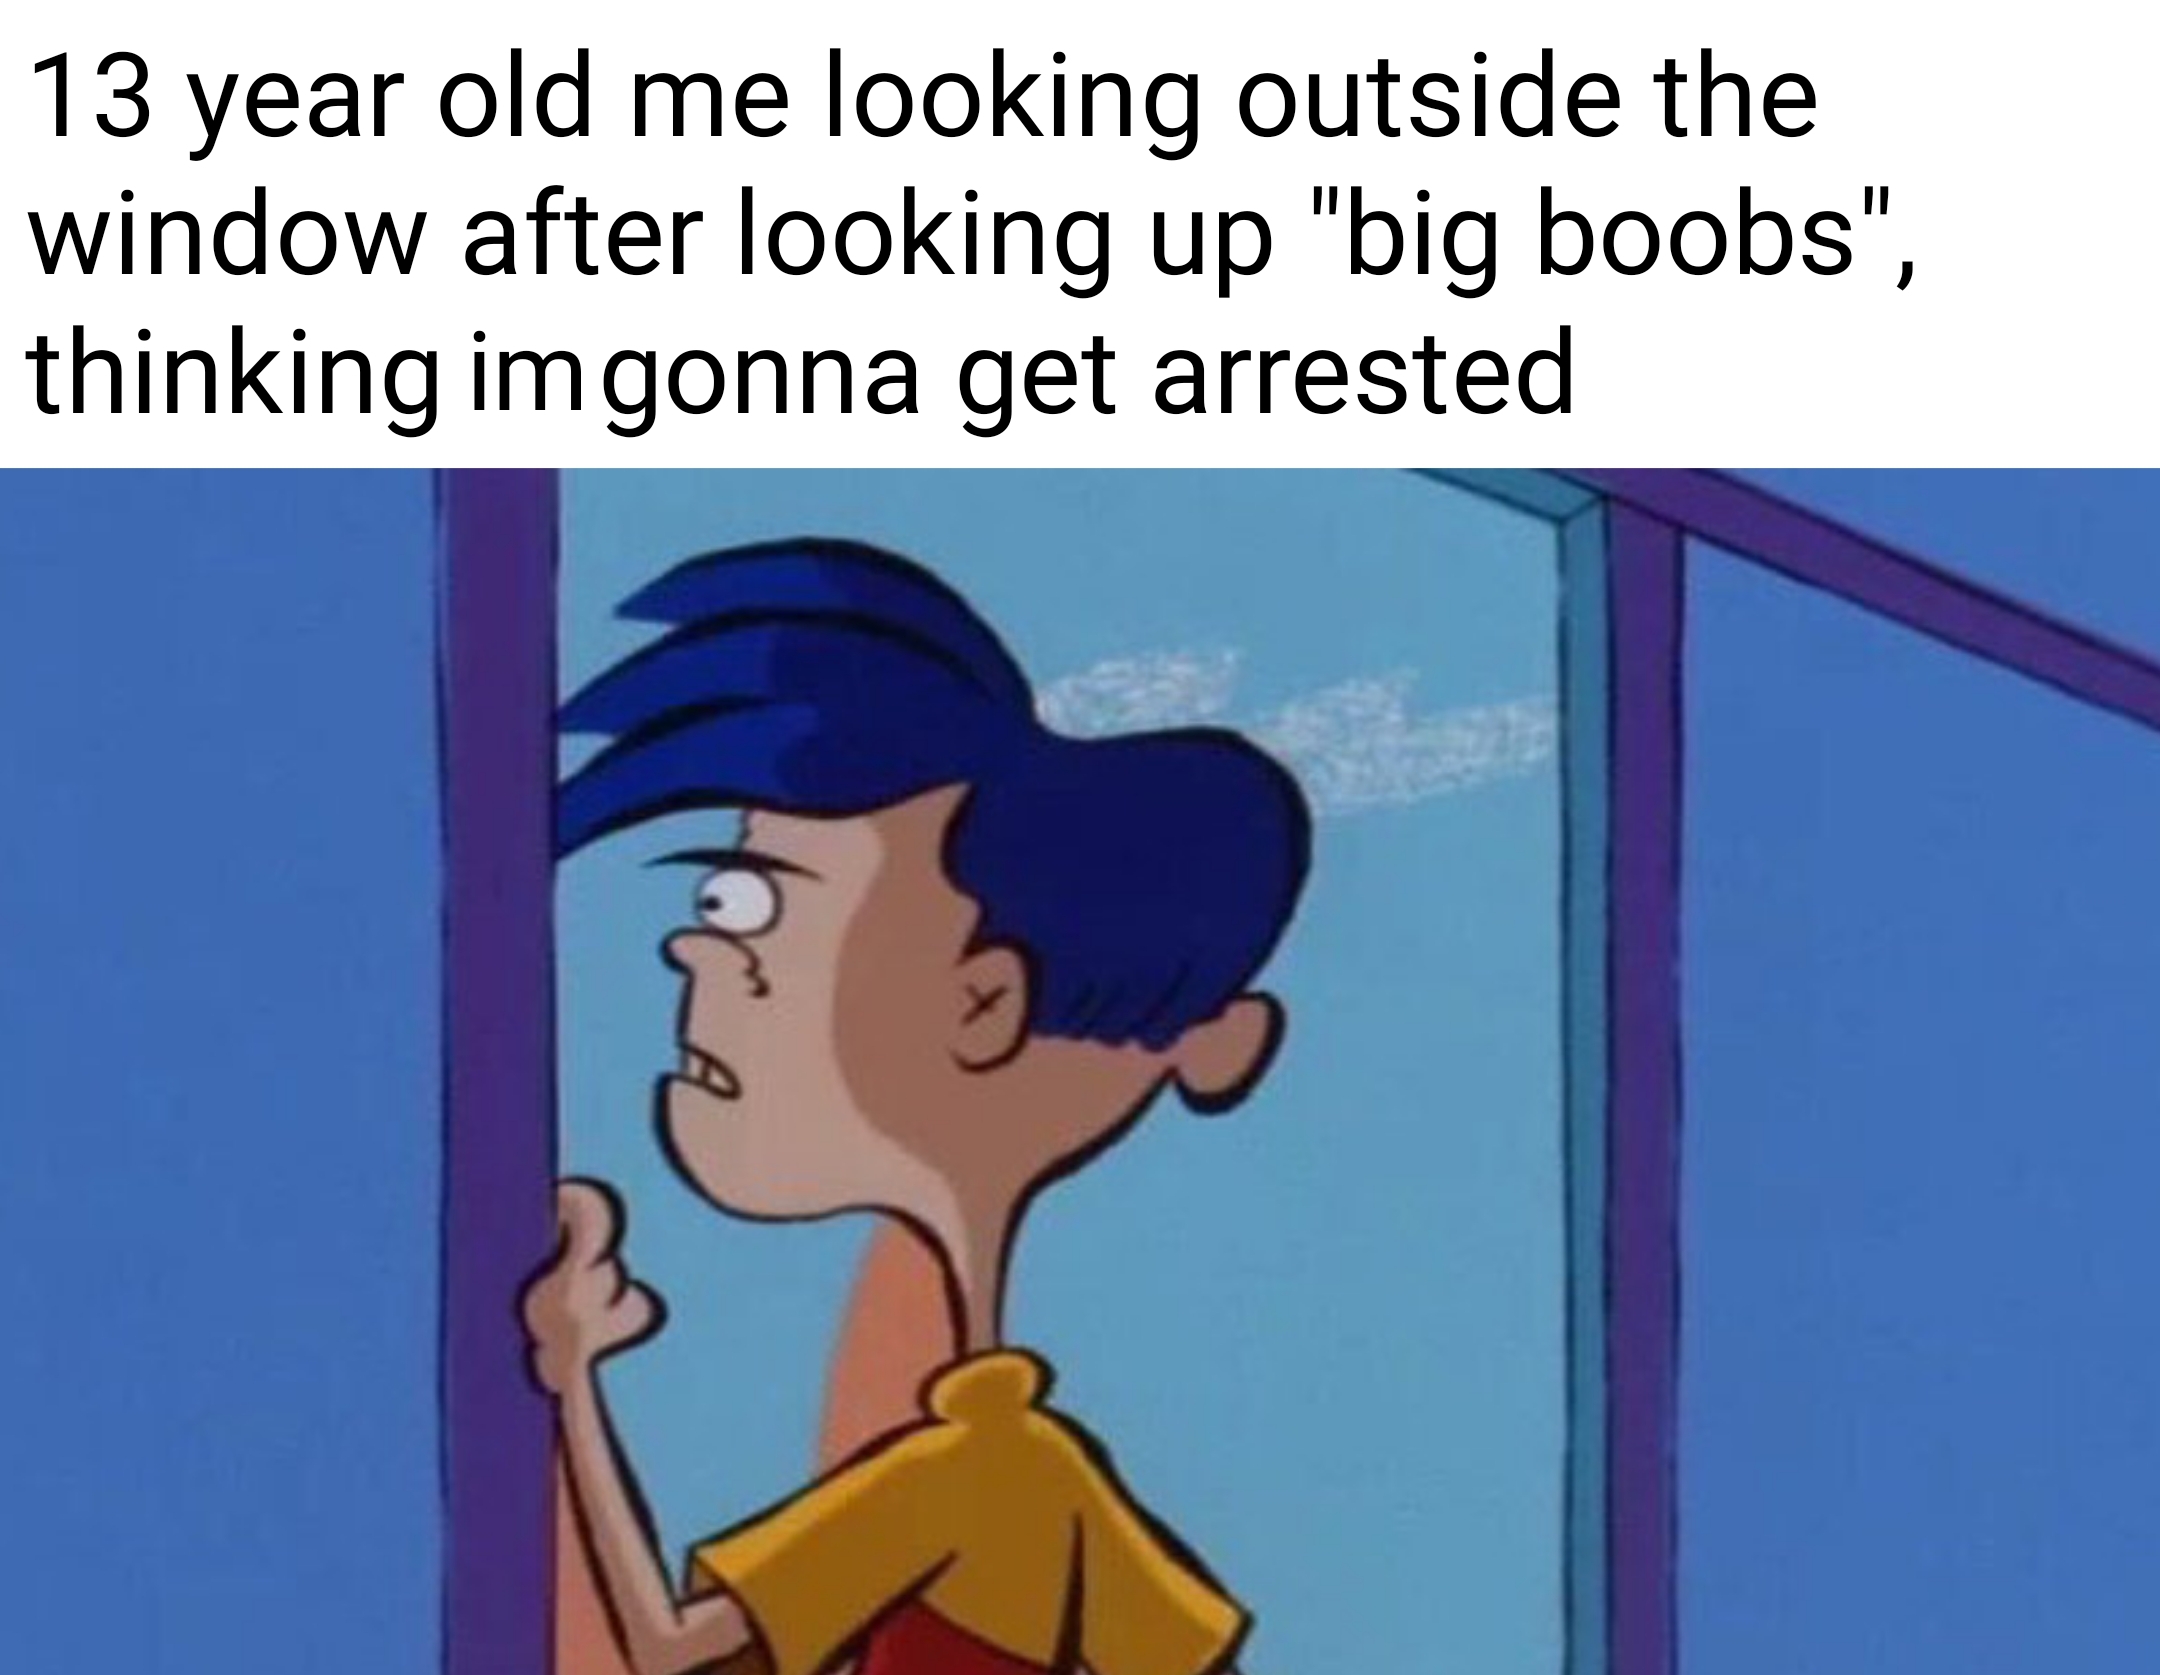 dank memes - rolf meme - 13 year old me looking outside the window after looking up "big boobs", thinking imgonna get arrested